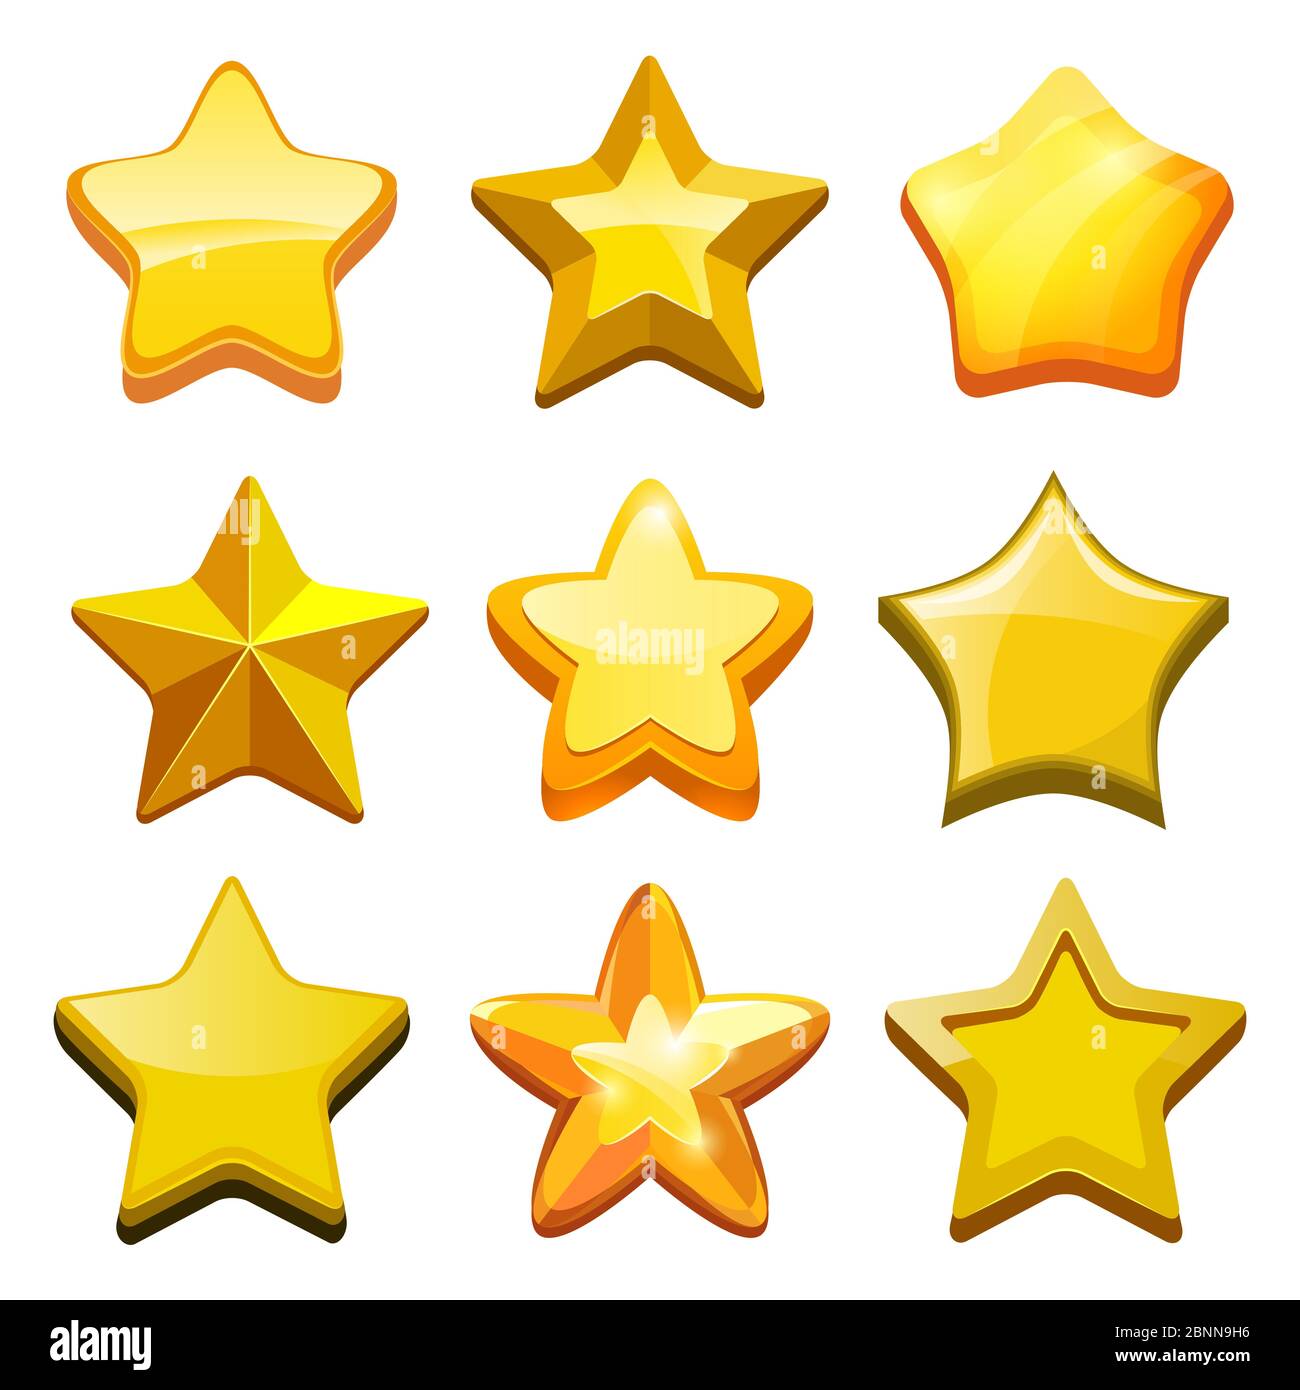 Game cartoon stars. Crystal golden gui buttons icons and status bar vector mobile gaming template Stock Vector